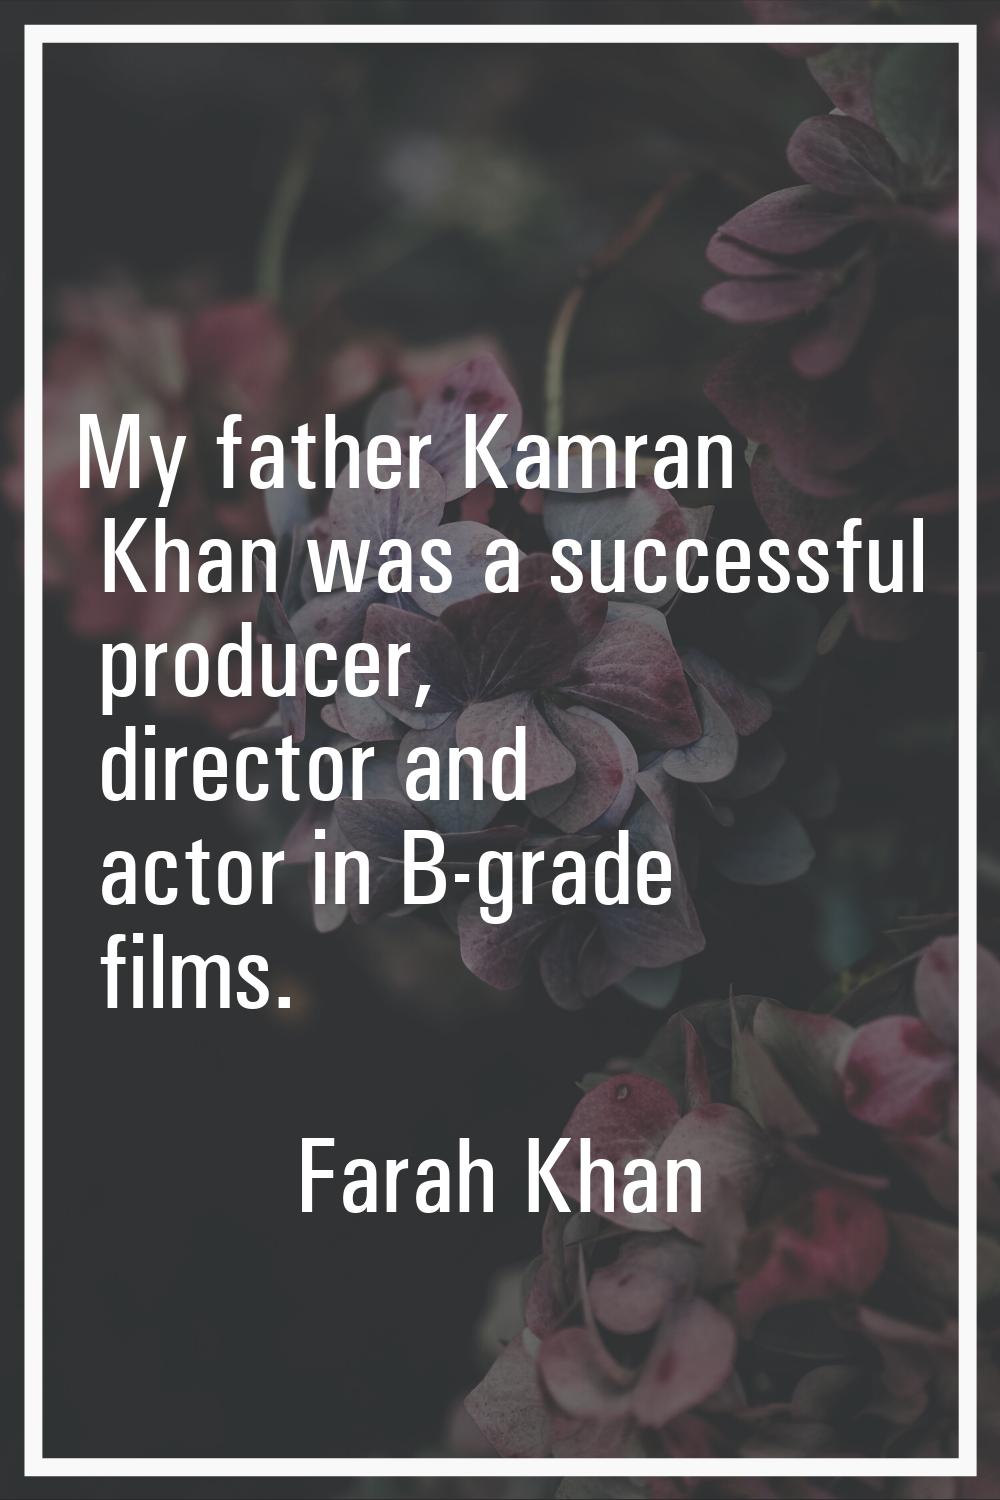 My father Kamran Khan was a successful producer, director and actor in B-grade films.